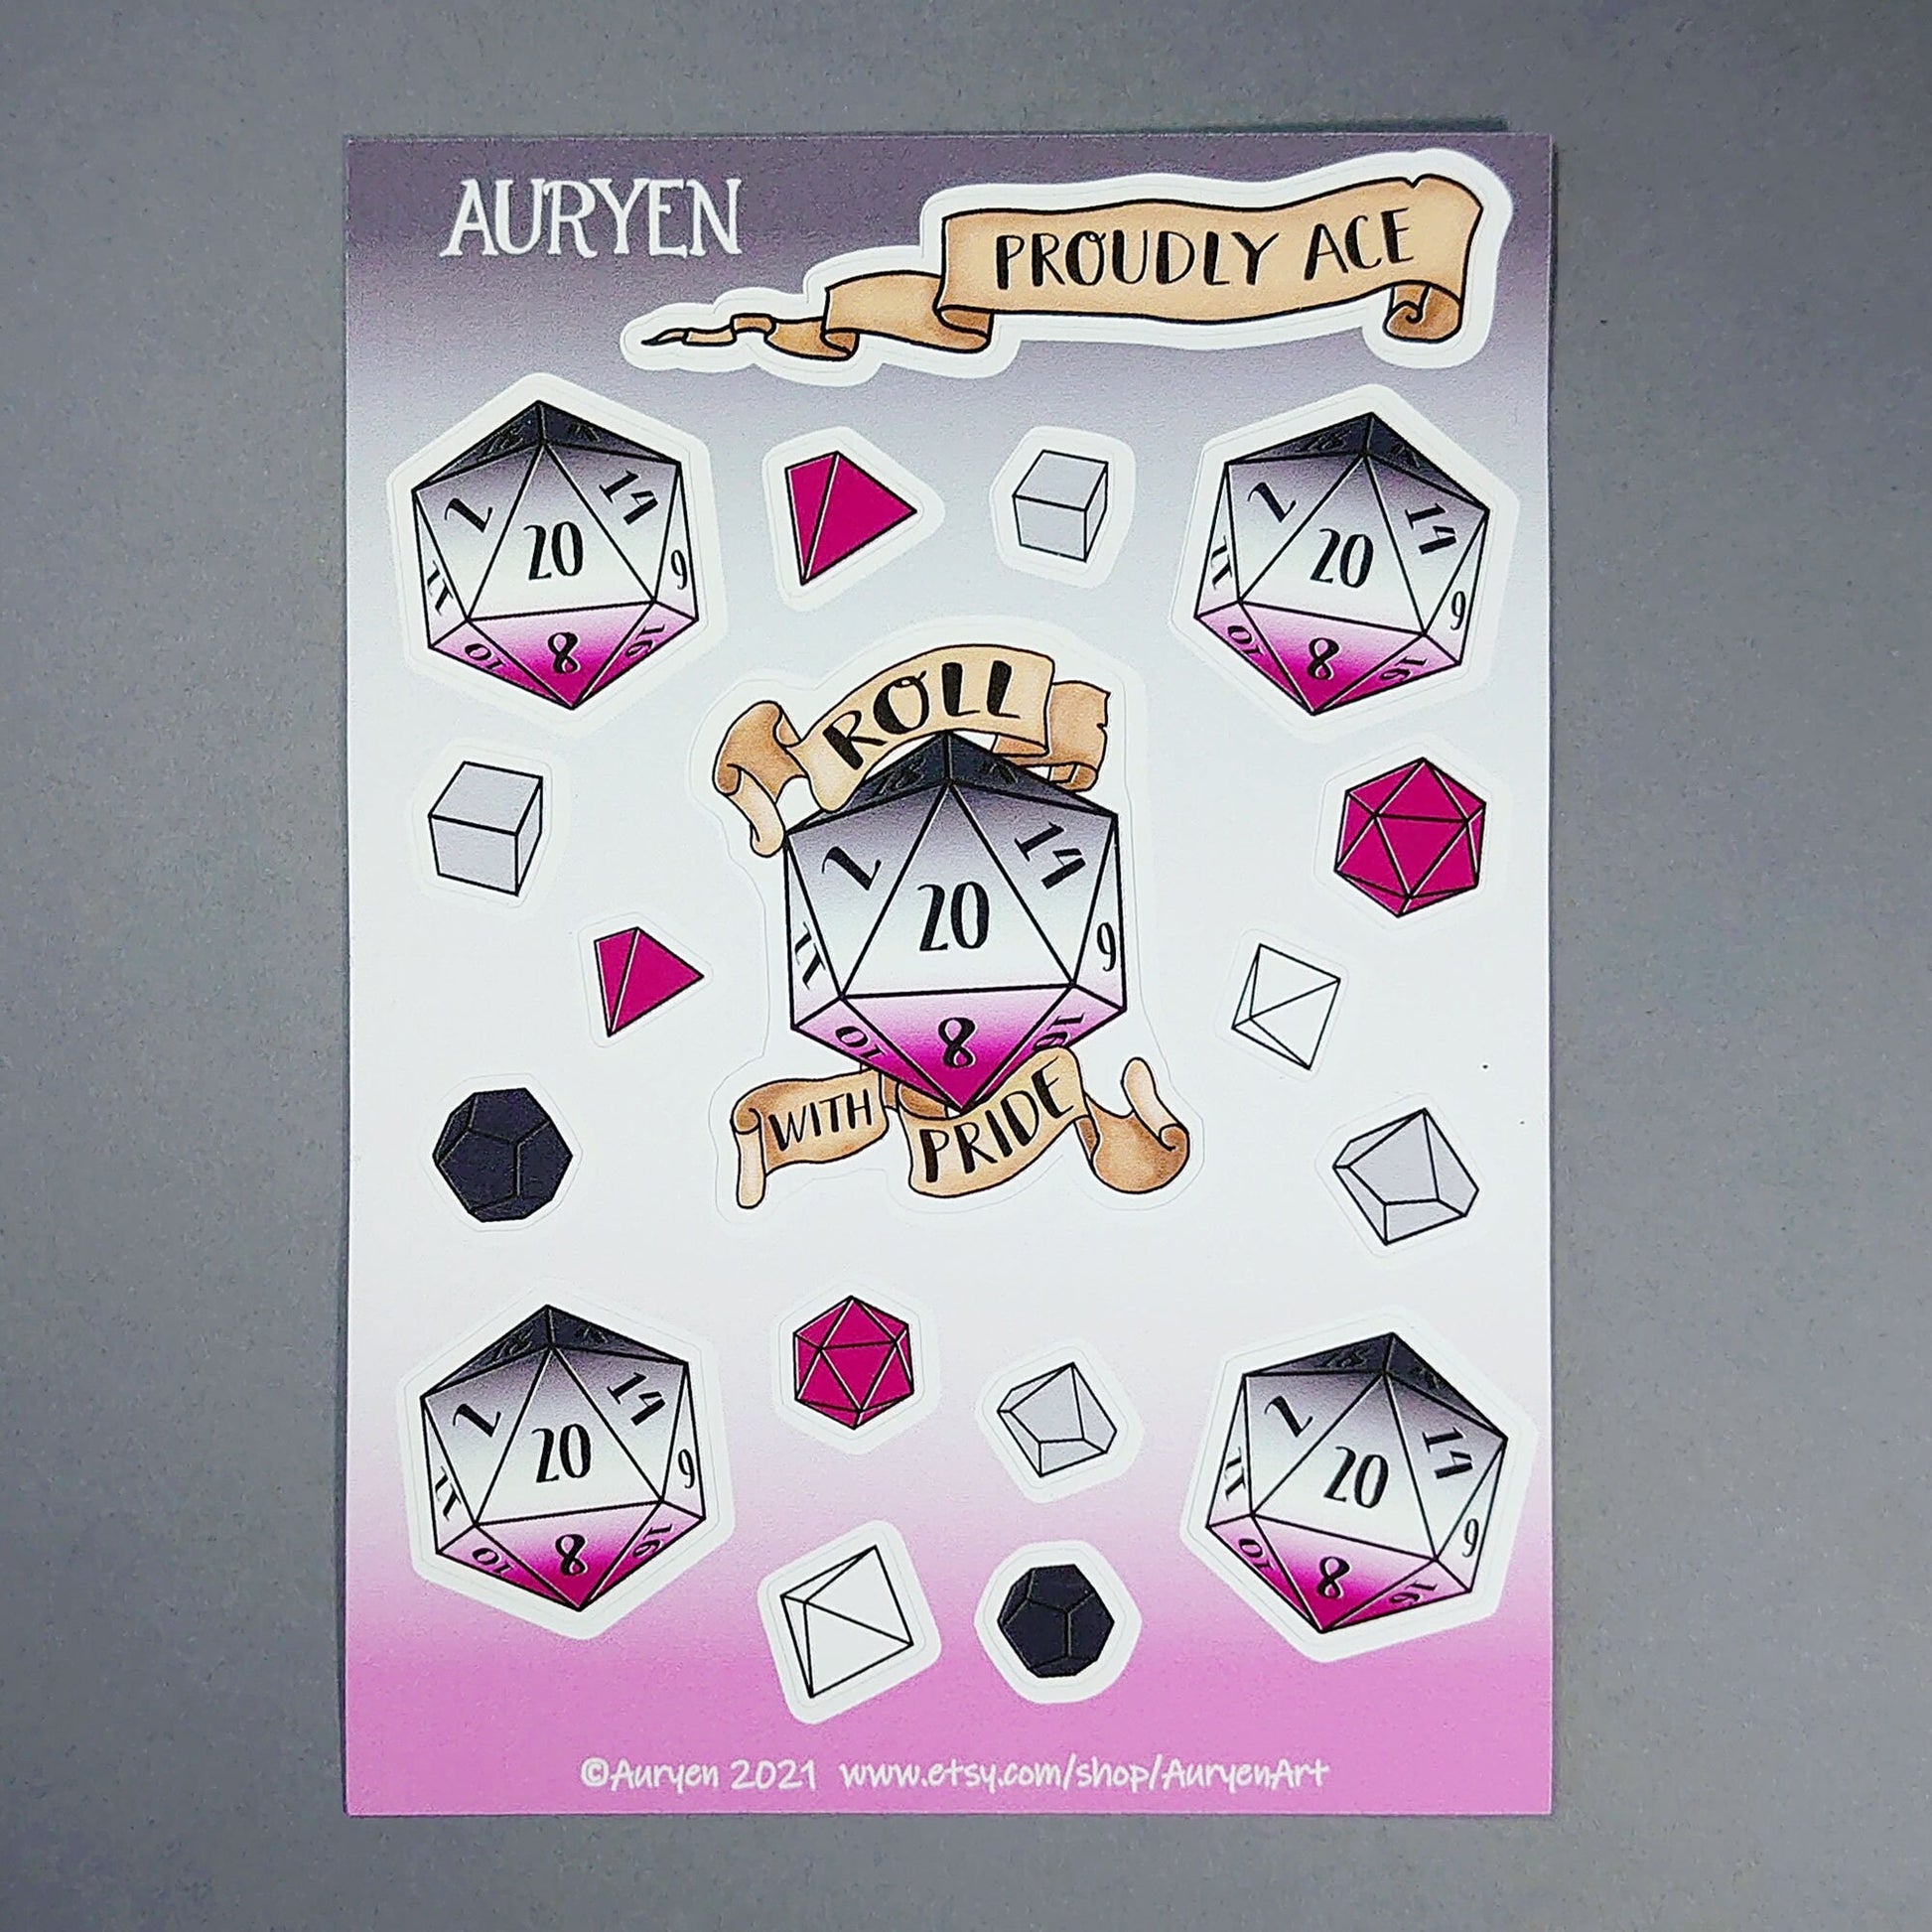 Asexual/Ace - D20 Pride Sticker Sheet - Decoration, Roleplaying, Scrapbooking Vinyl Sticker Sheet